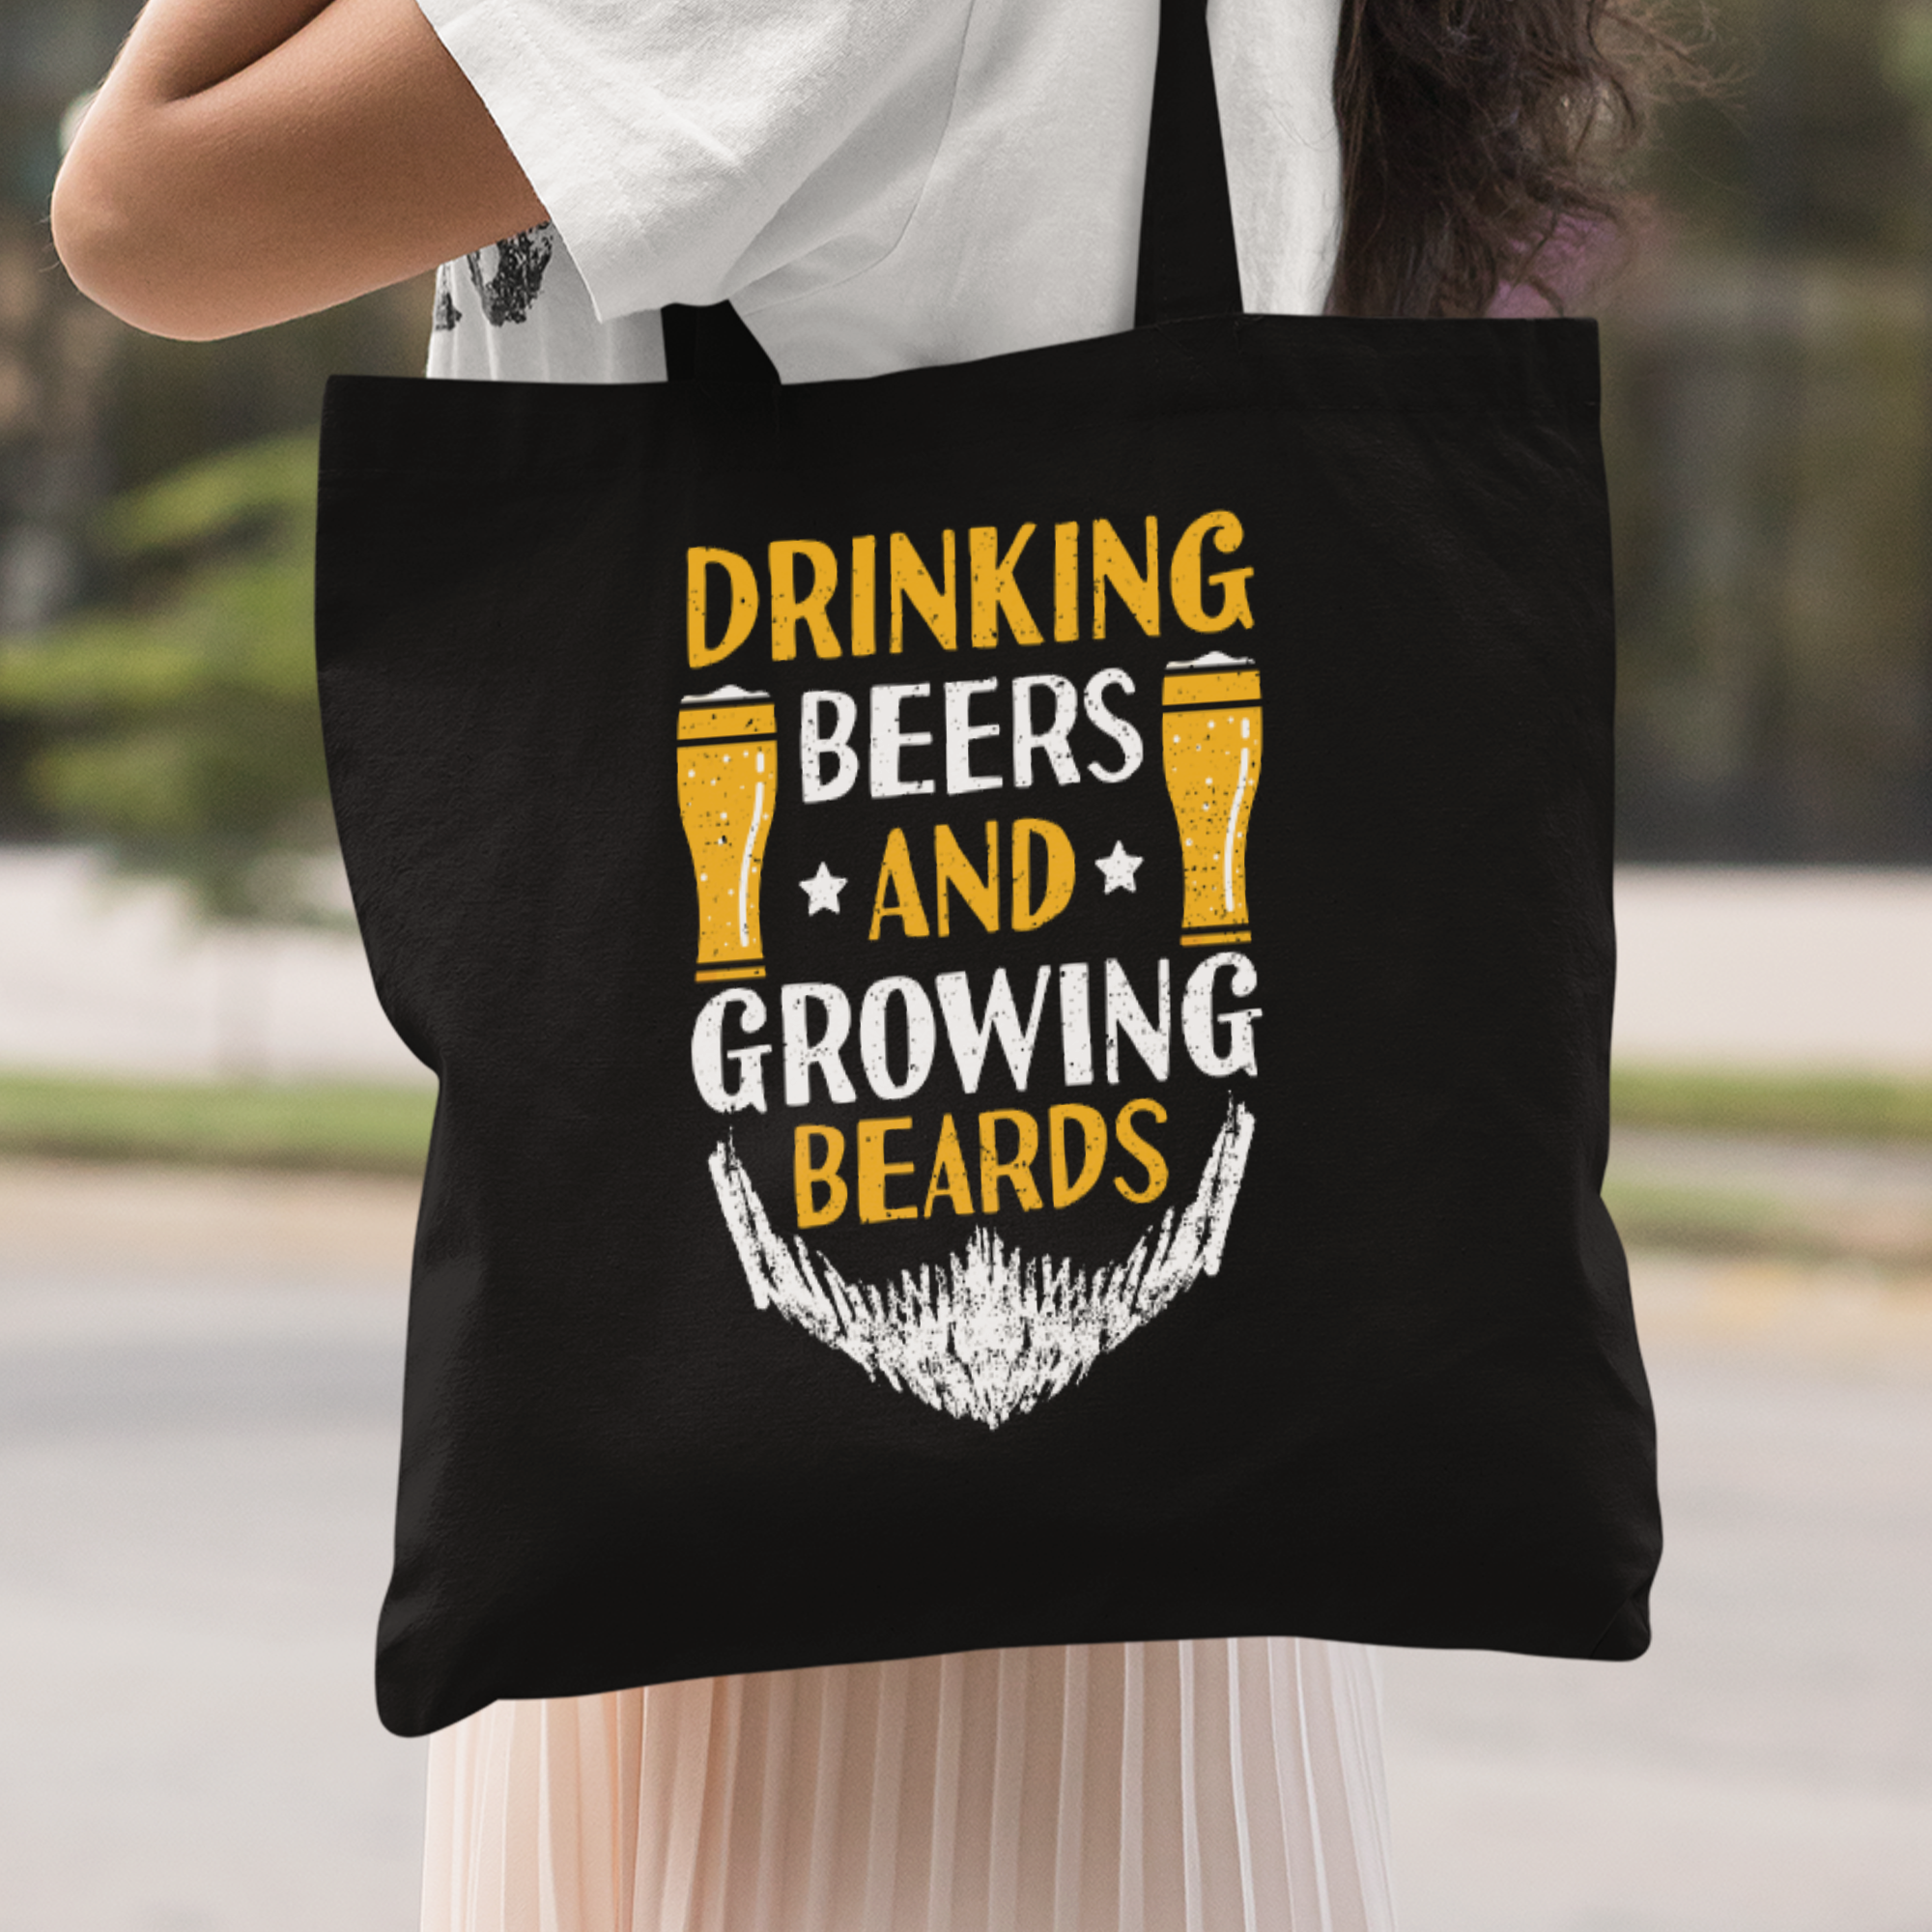 Drinking Beers And Growing Beards Stoffbeutel - DESIGNSBYJNK5.COM